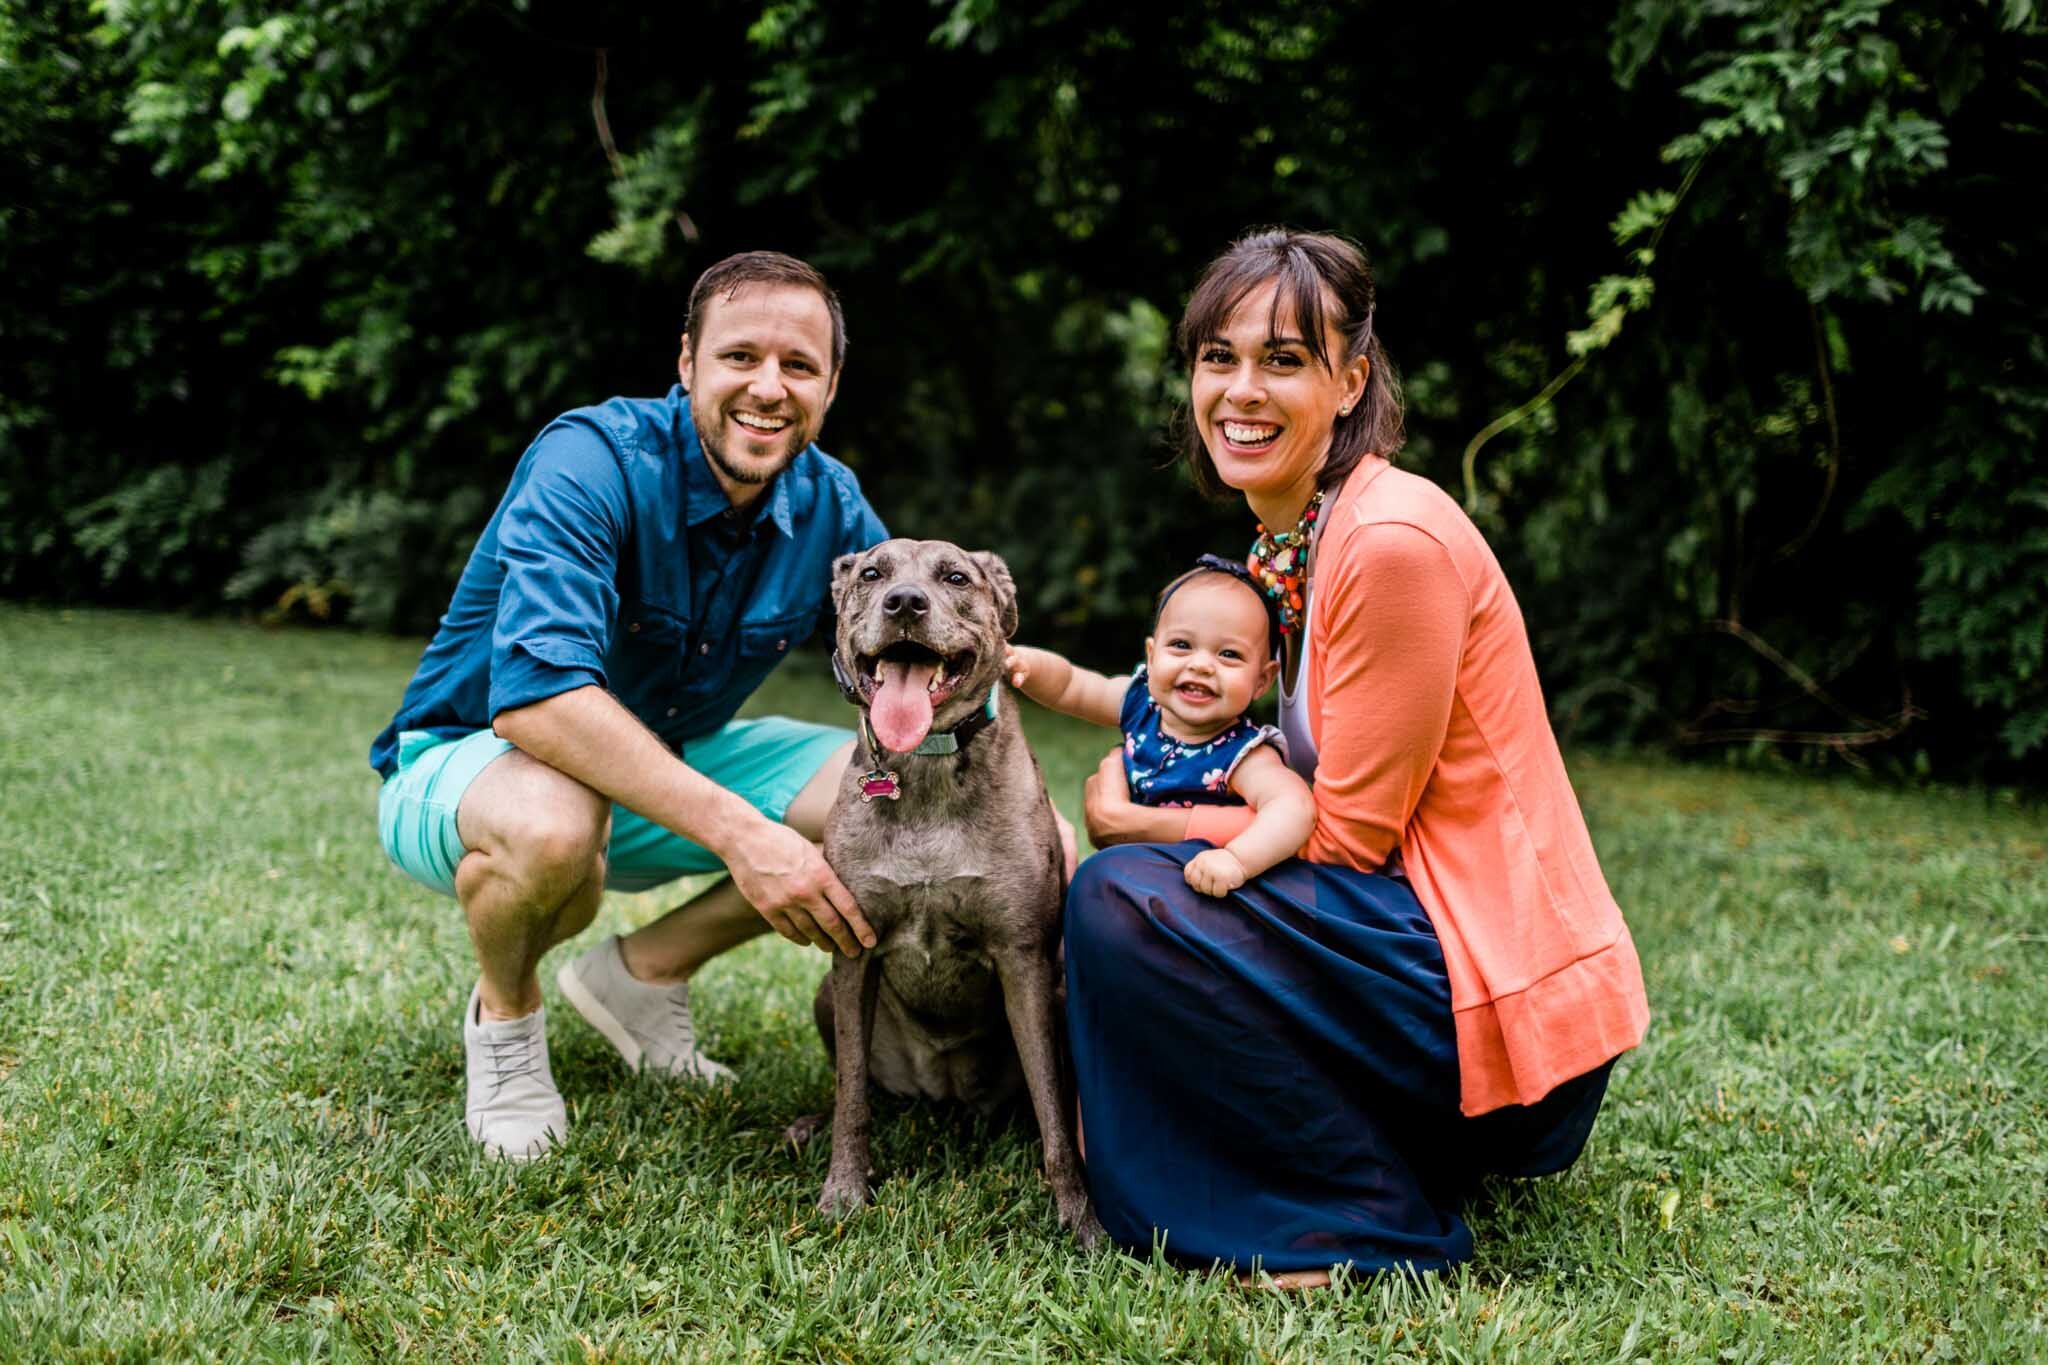 Raleigh Family Photographer | By G. Lin Photography | Lifestyle family portrait outside 